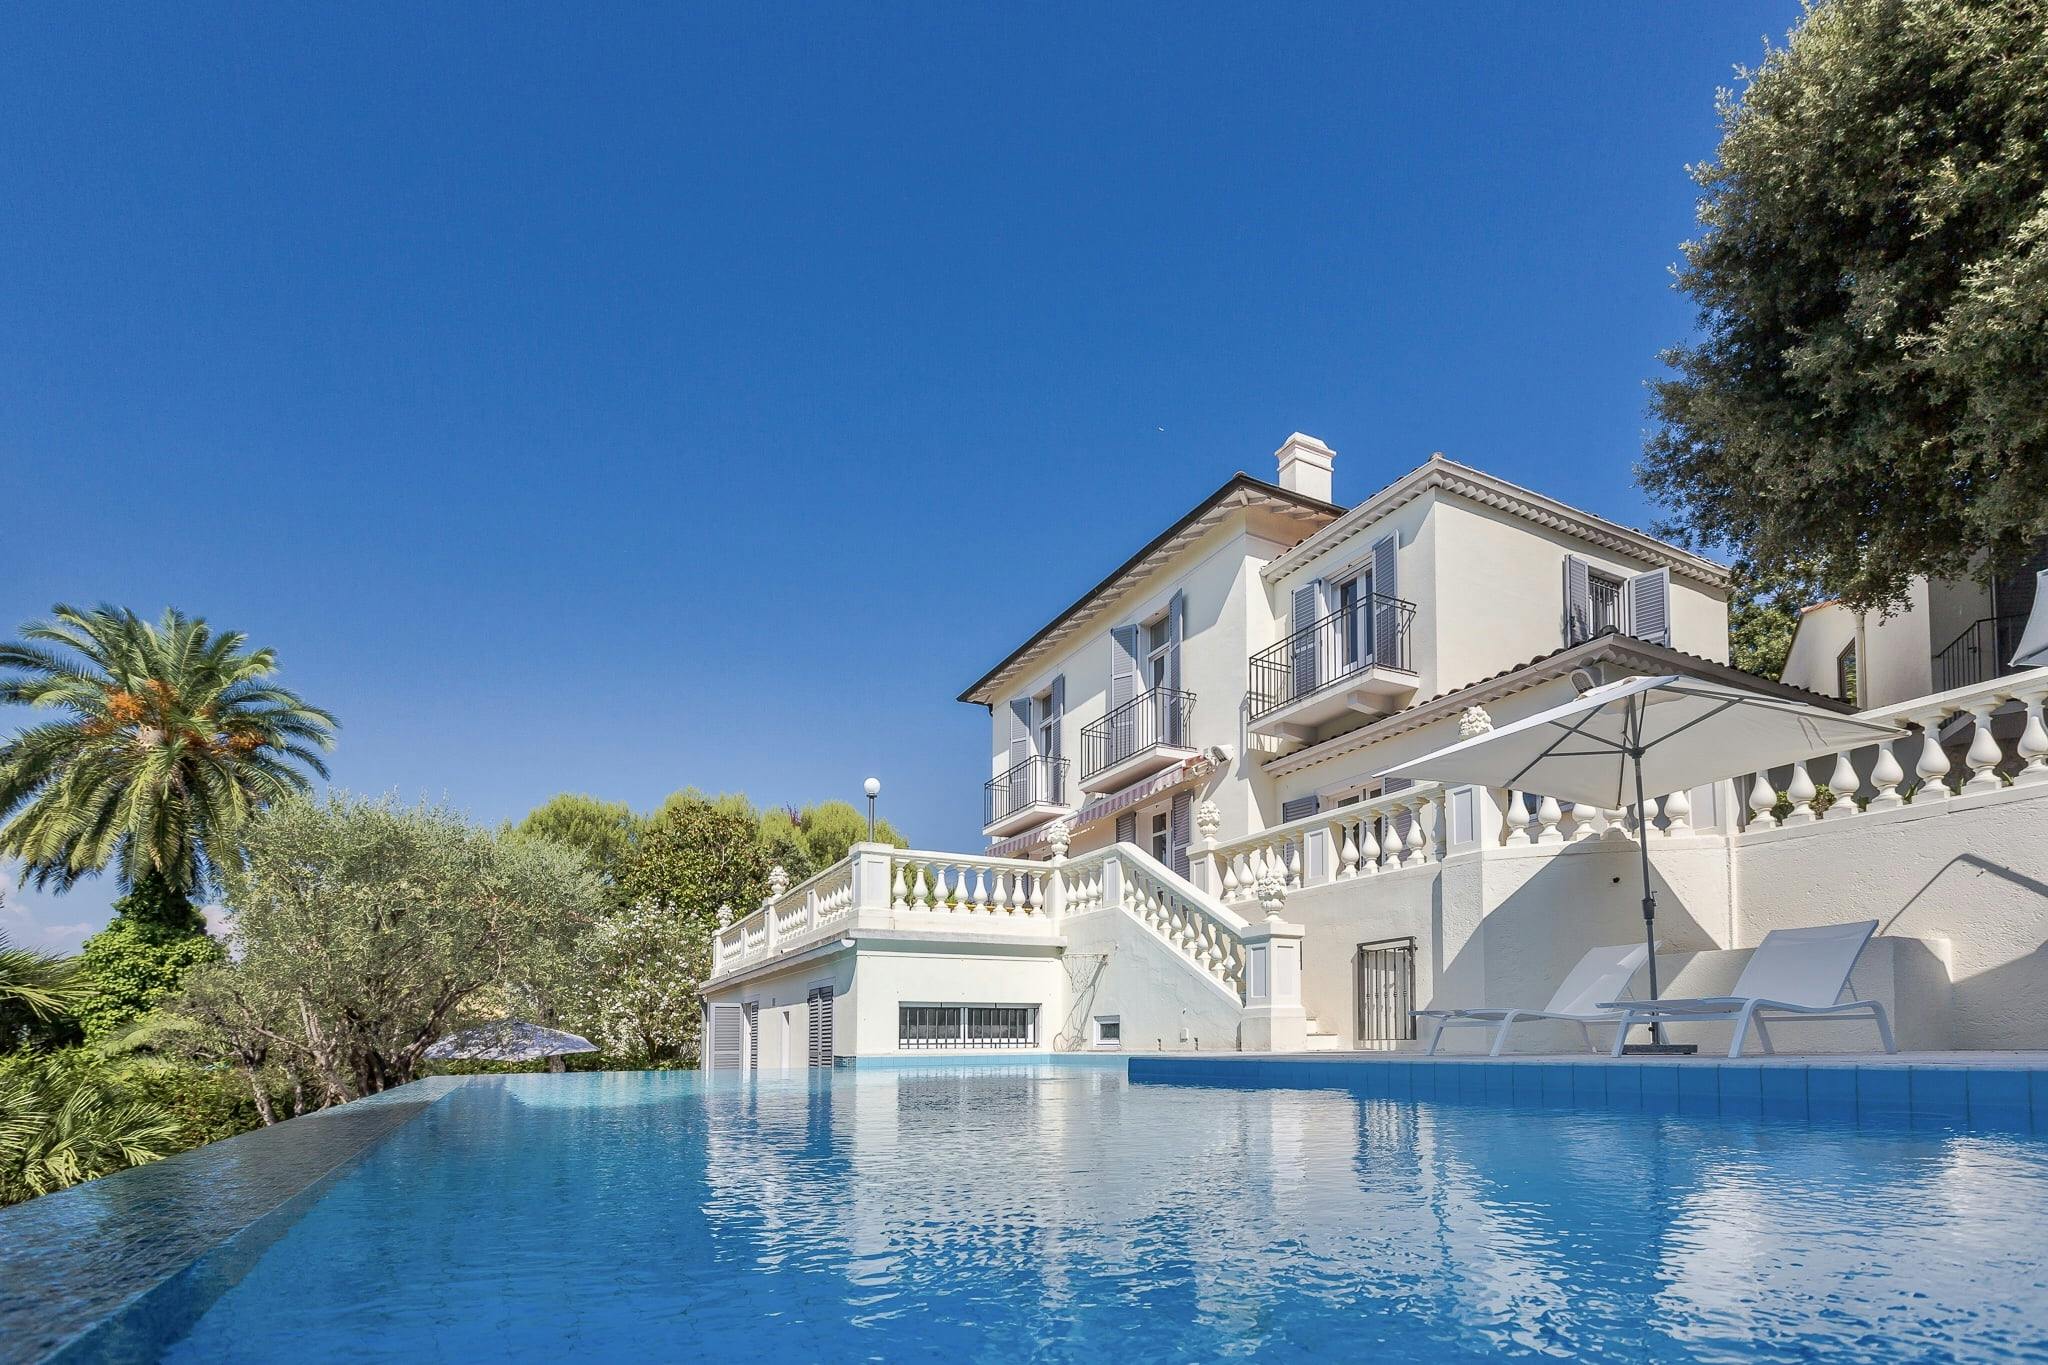 Villa Cosima with white façade, pool in foreground and blue sky tree-lined railing